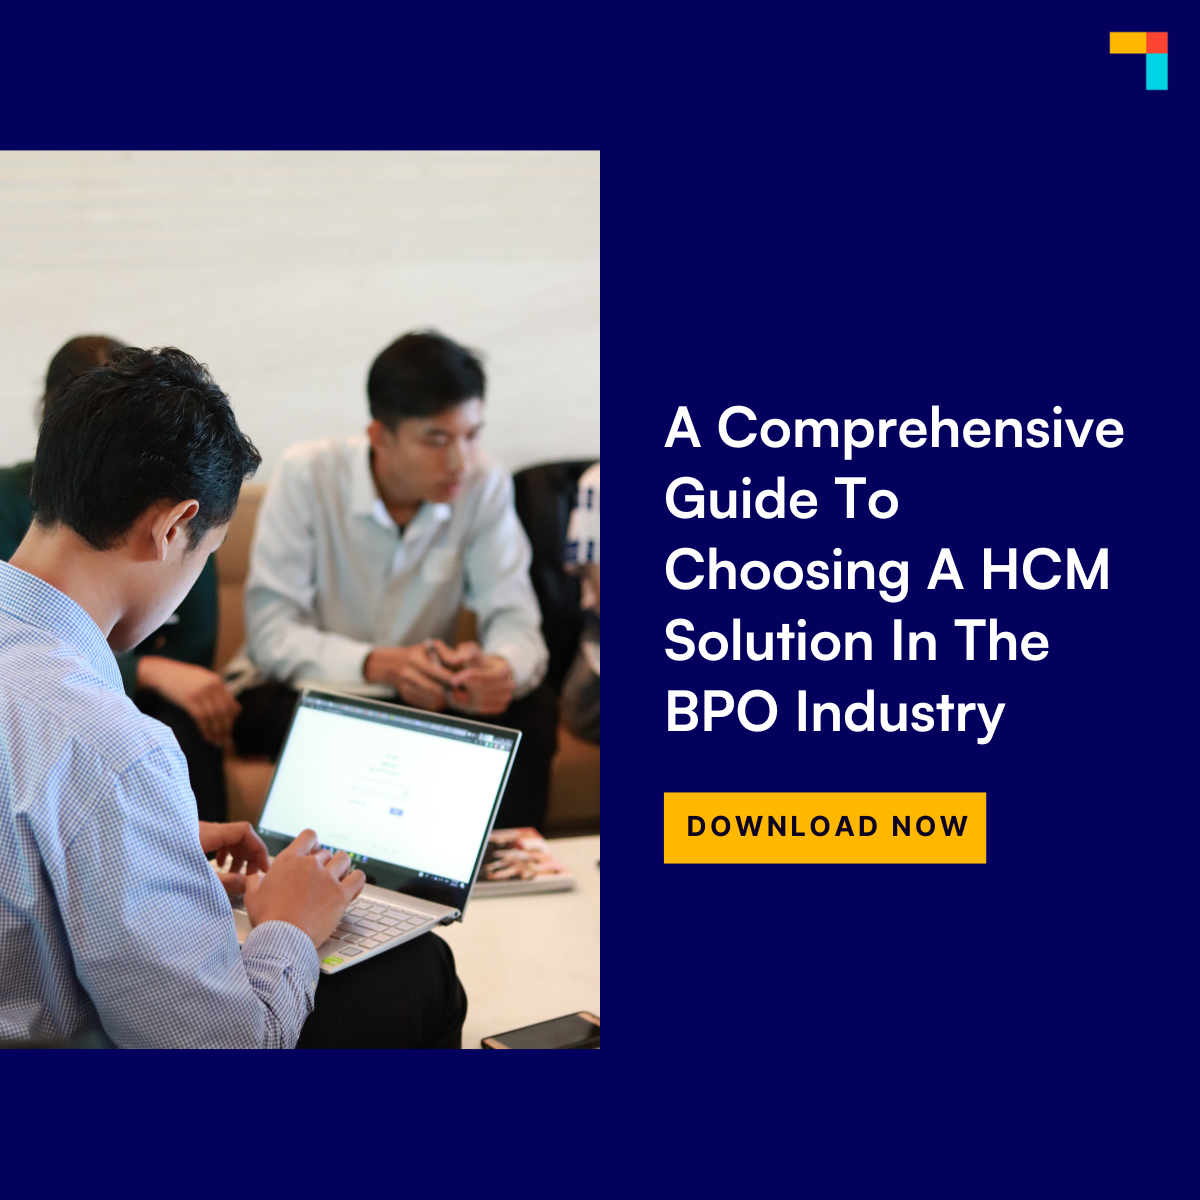 A People Leader’s Guide to Choosing A HCM Solution in the Outsourcing Industry